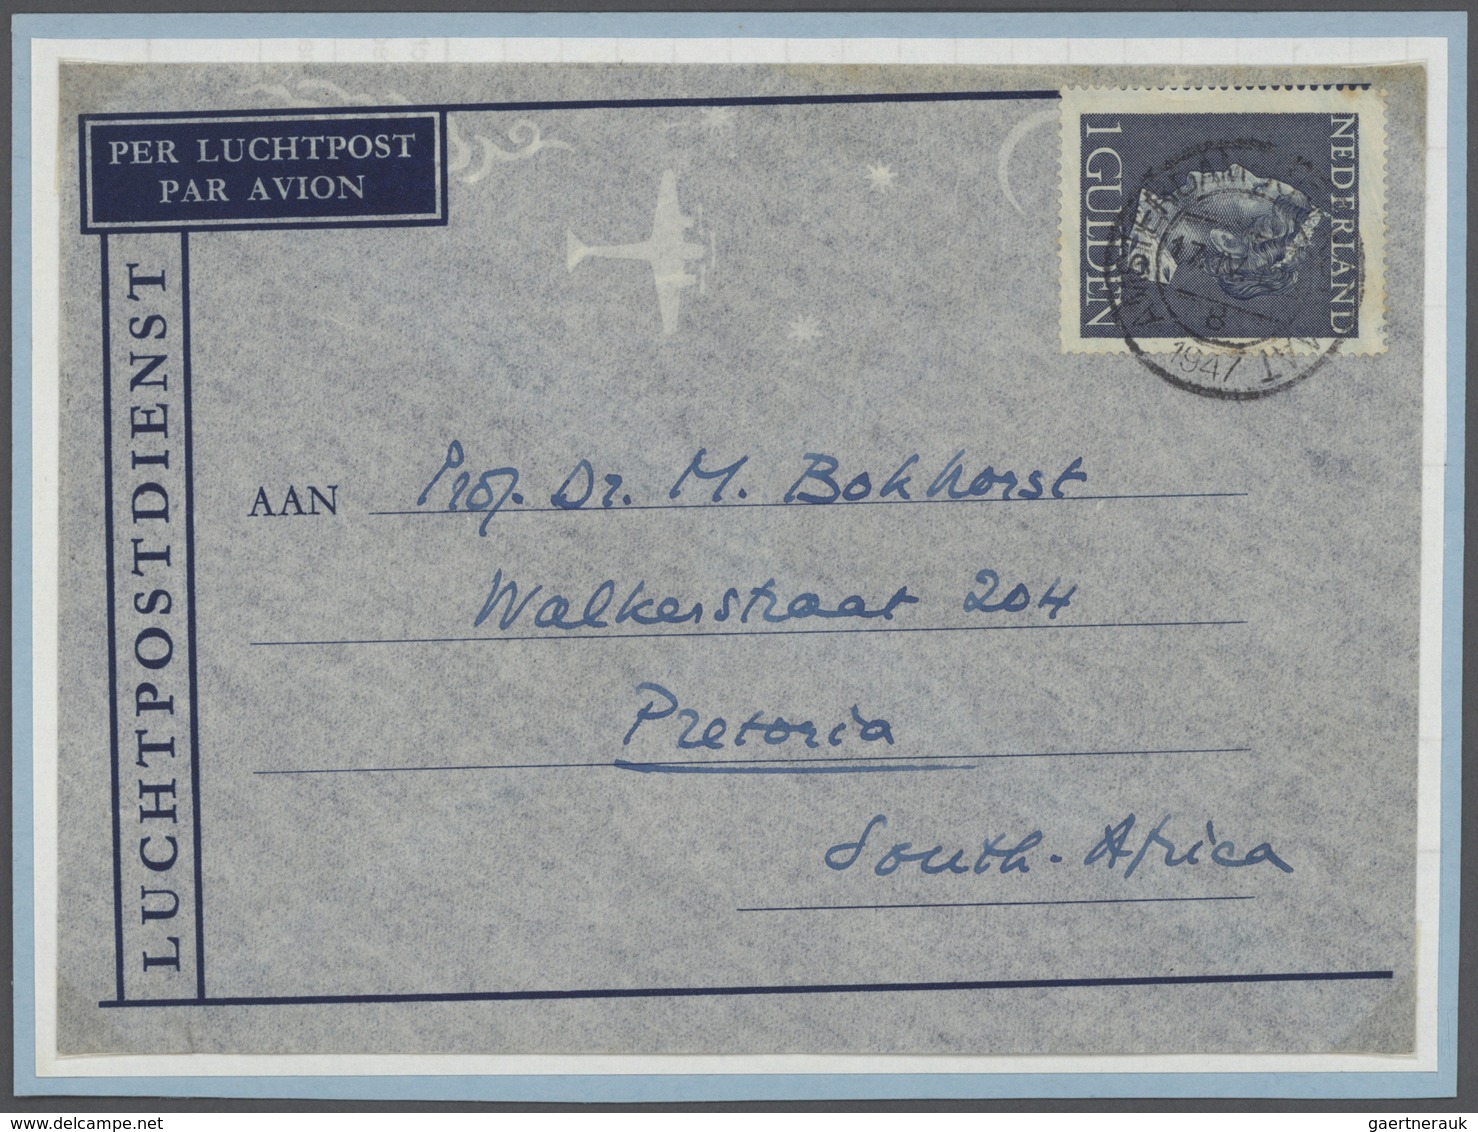 27470 Niederlande: 1948 from ca., comprehensive collection with more than 170 covers, focus on "postal rat